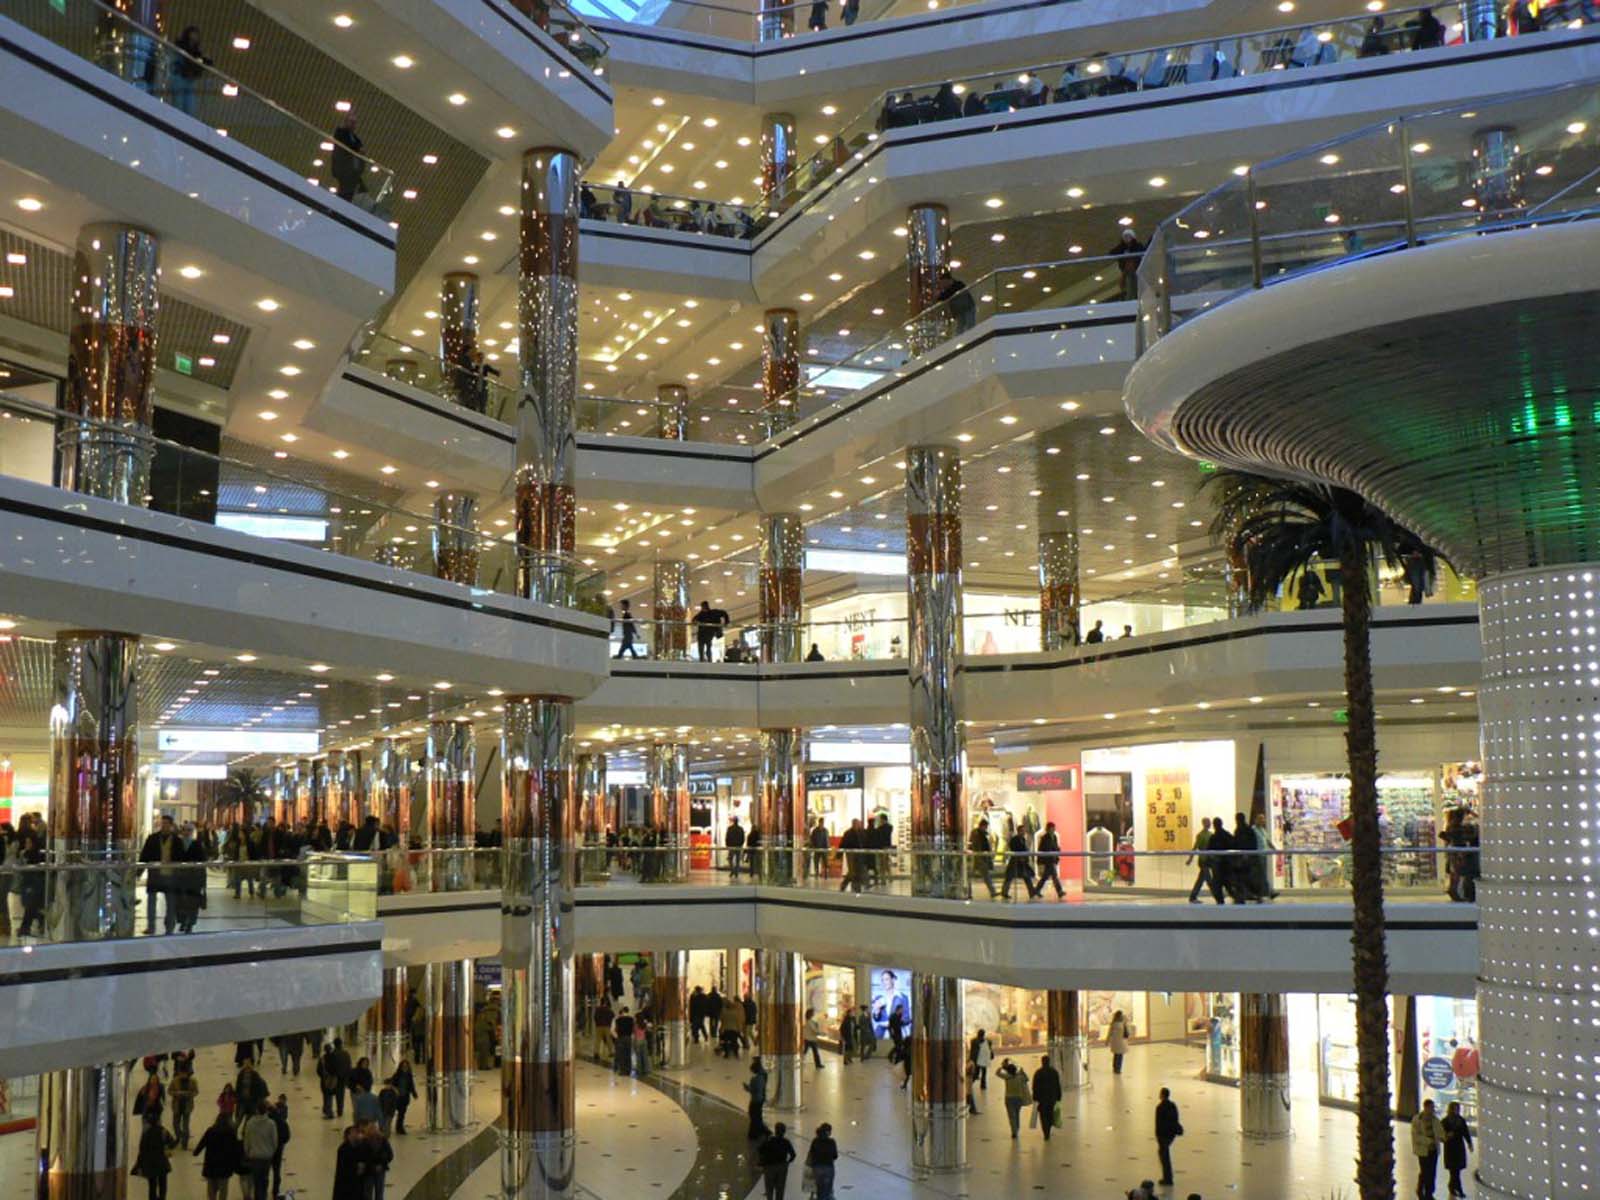 New shopping mall